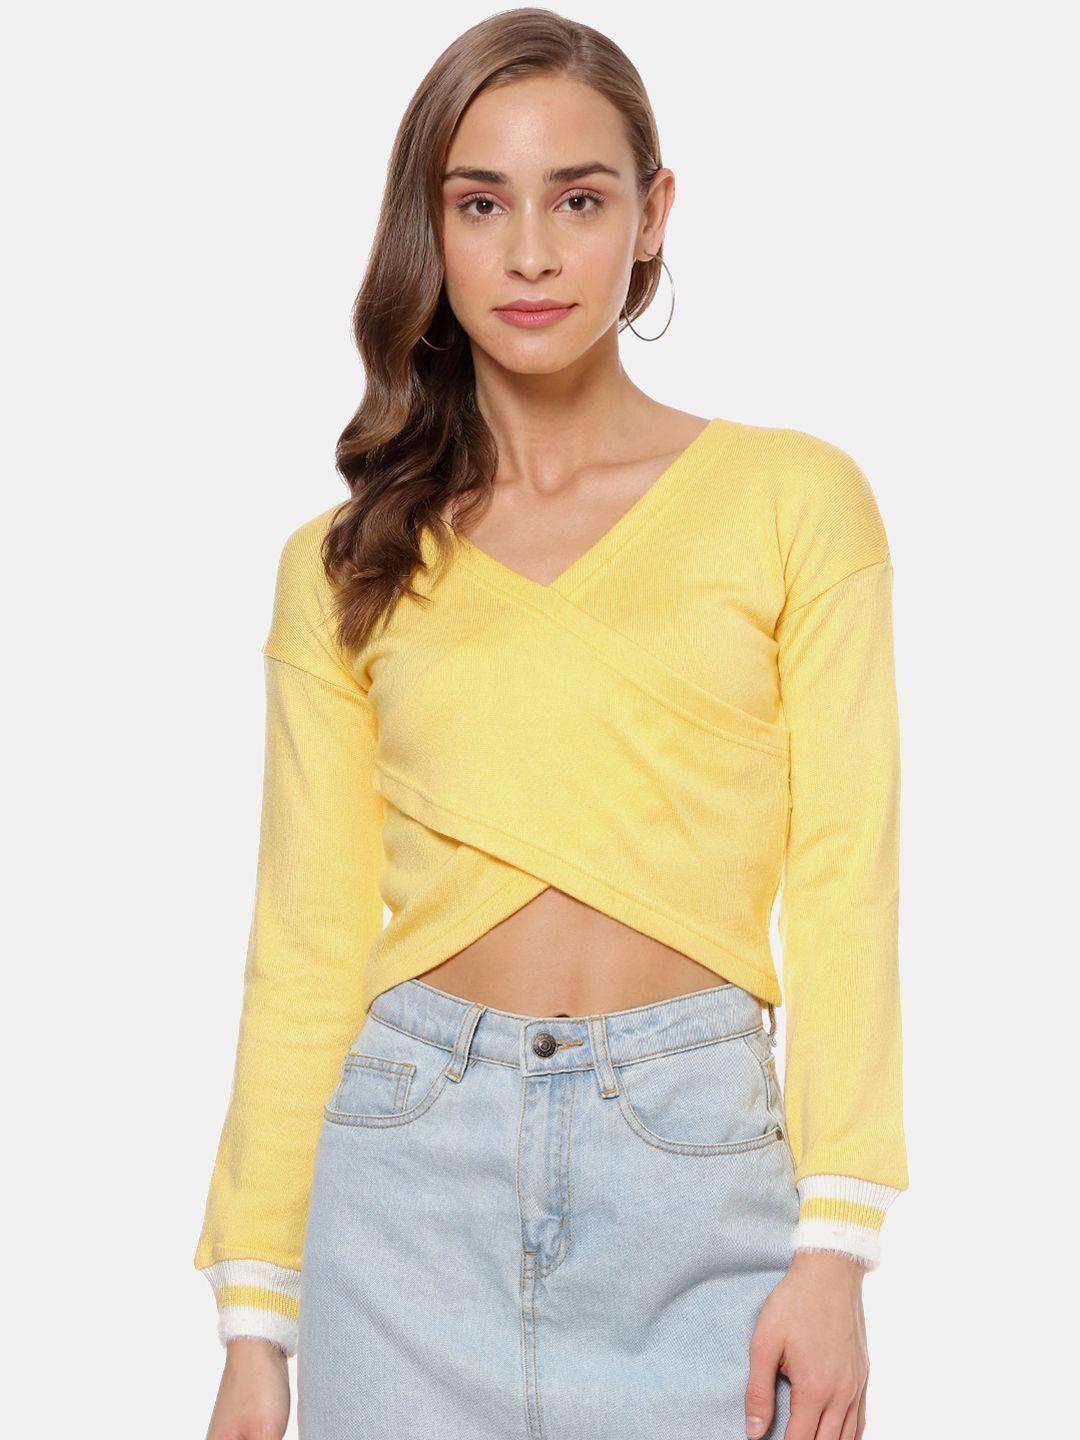 campus-sutra-women-yellow-solid-wrap-crop-top